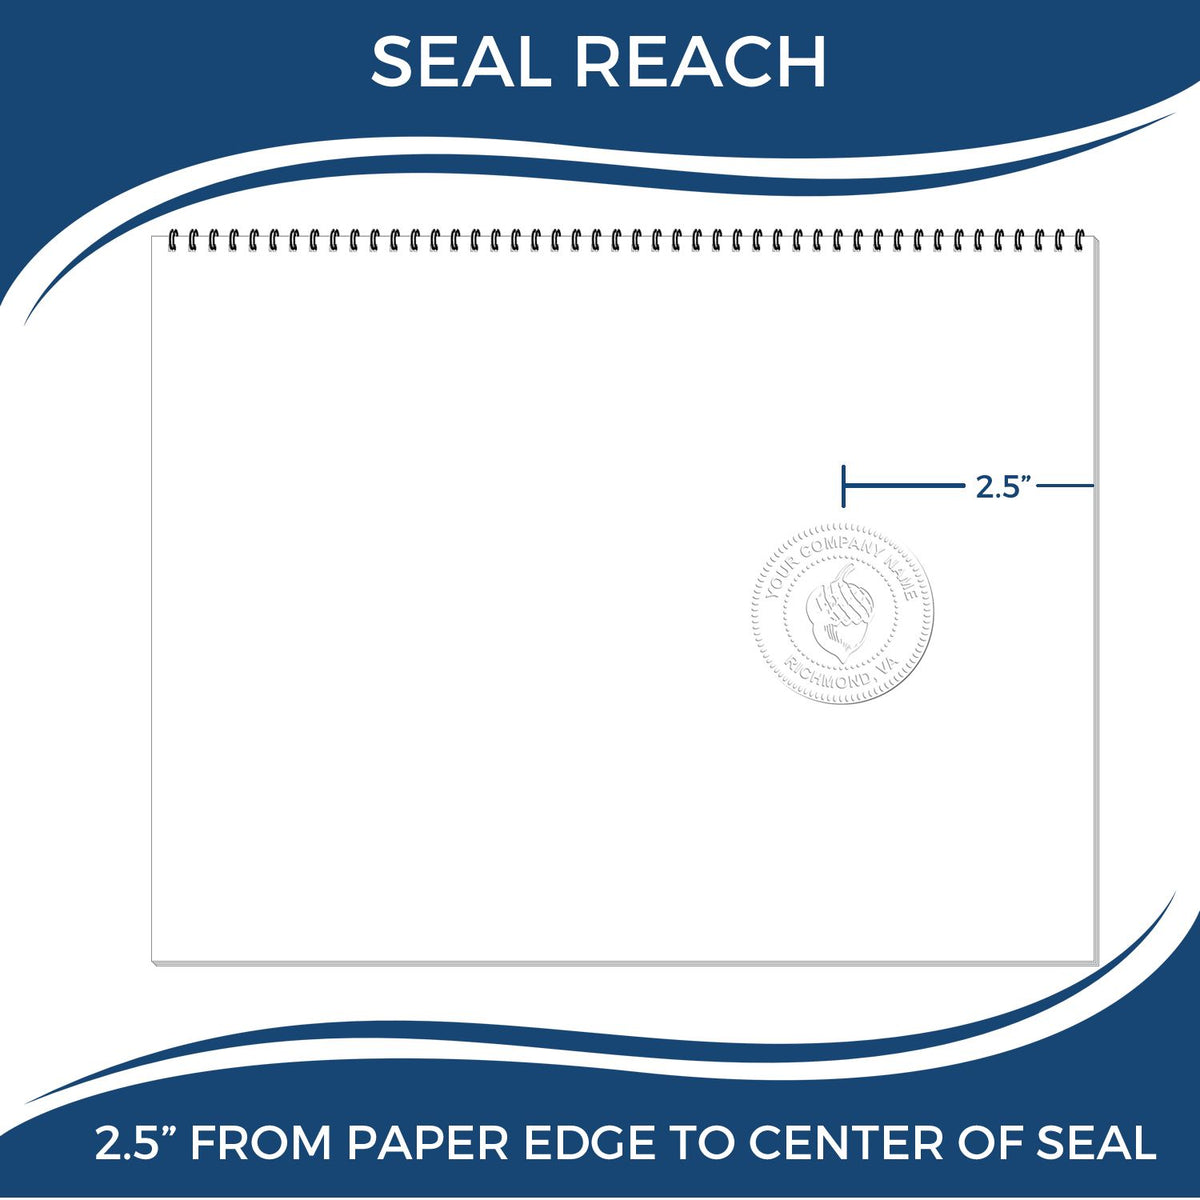 An infographic showing the seal reach which is represented by a ruler and a miniature seal image of the Heavy Duty Cast Iron District of Columbia Geologist Seal Embosser